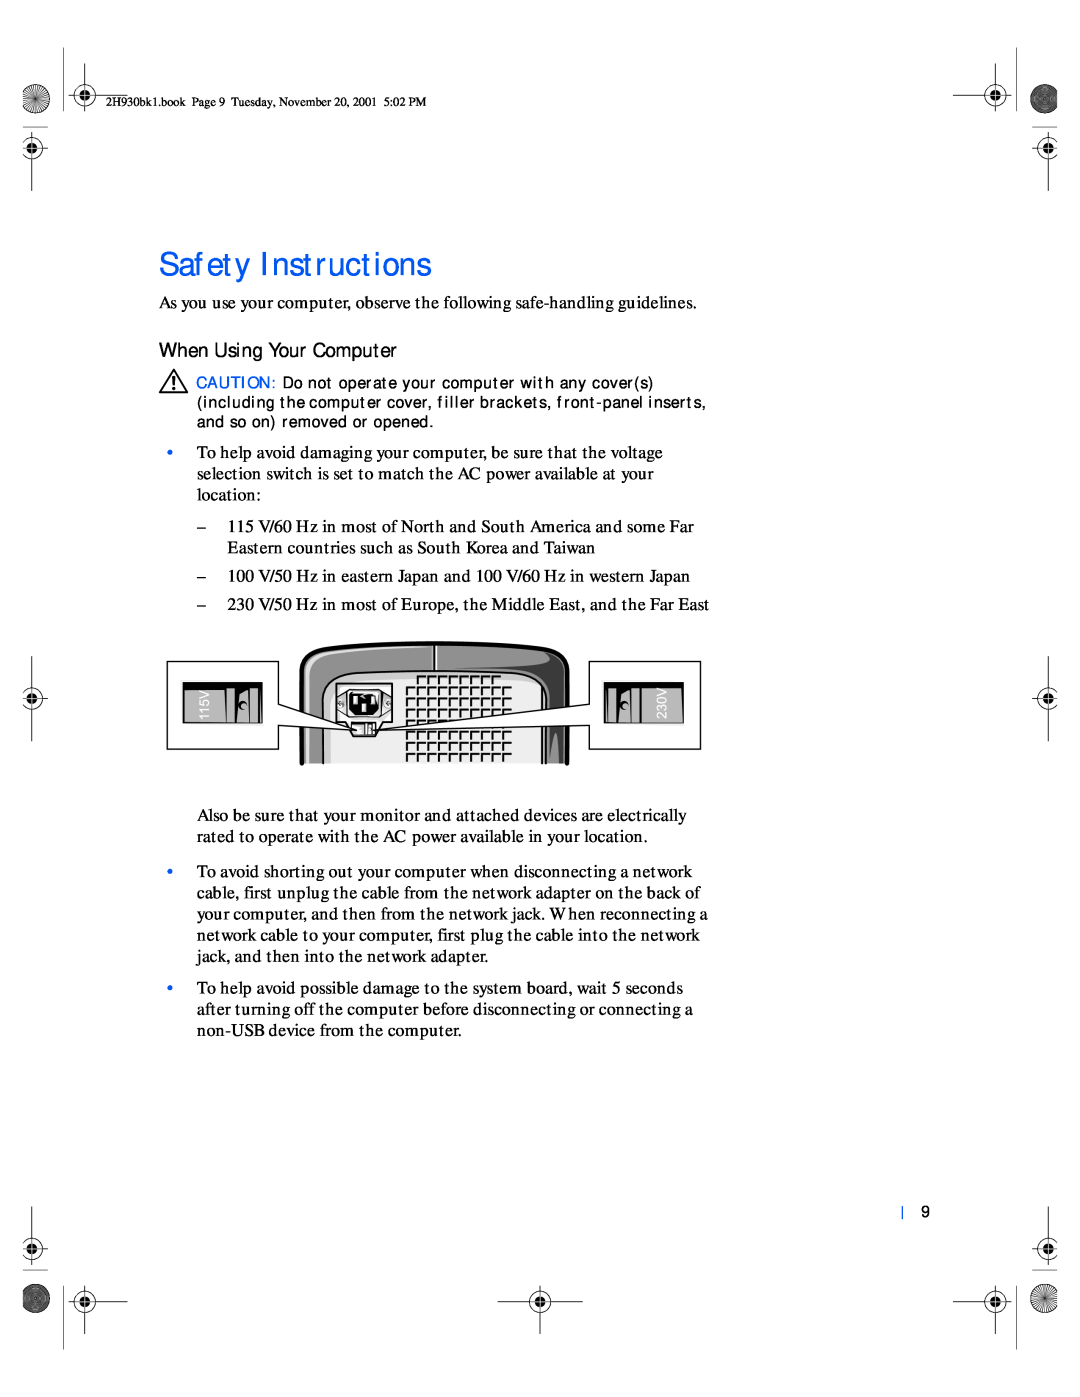 Dell 4300 manual Safety Instructions, When Using Your Computer 